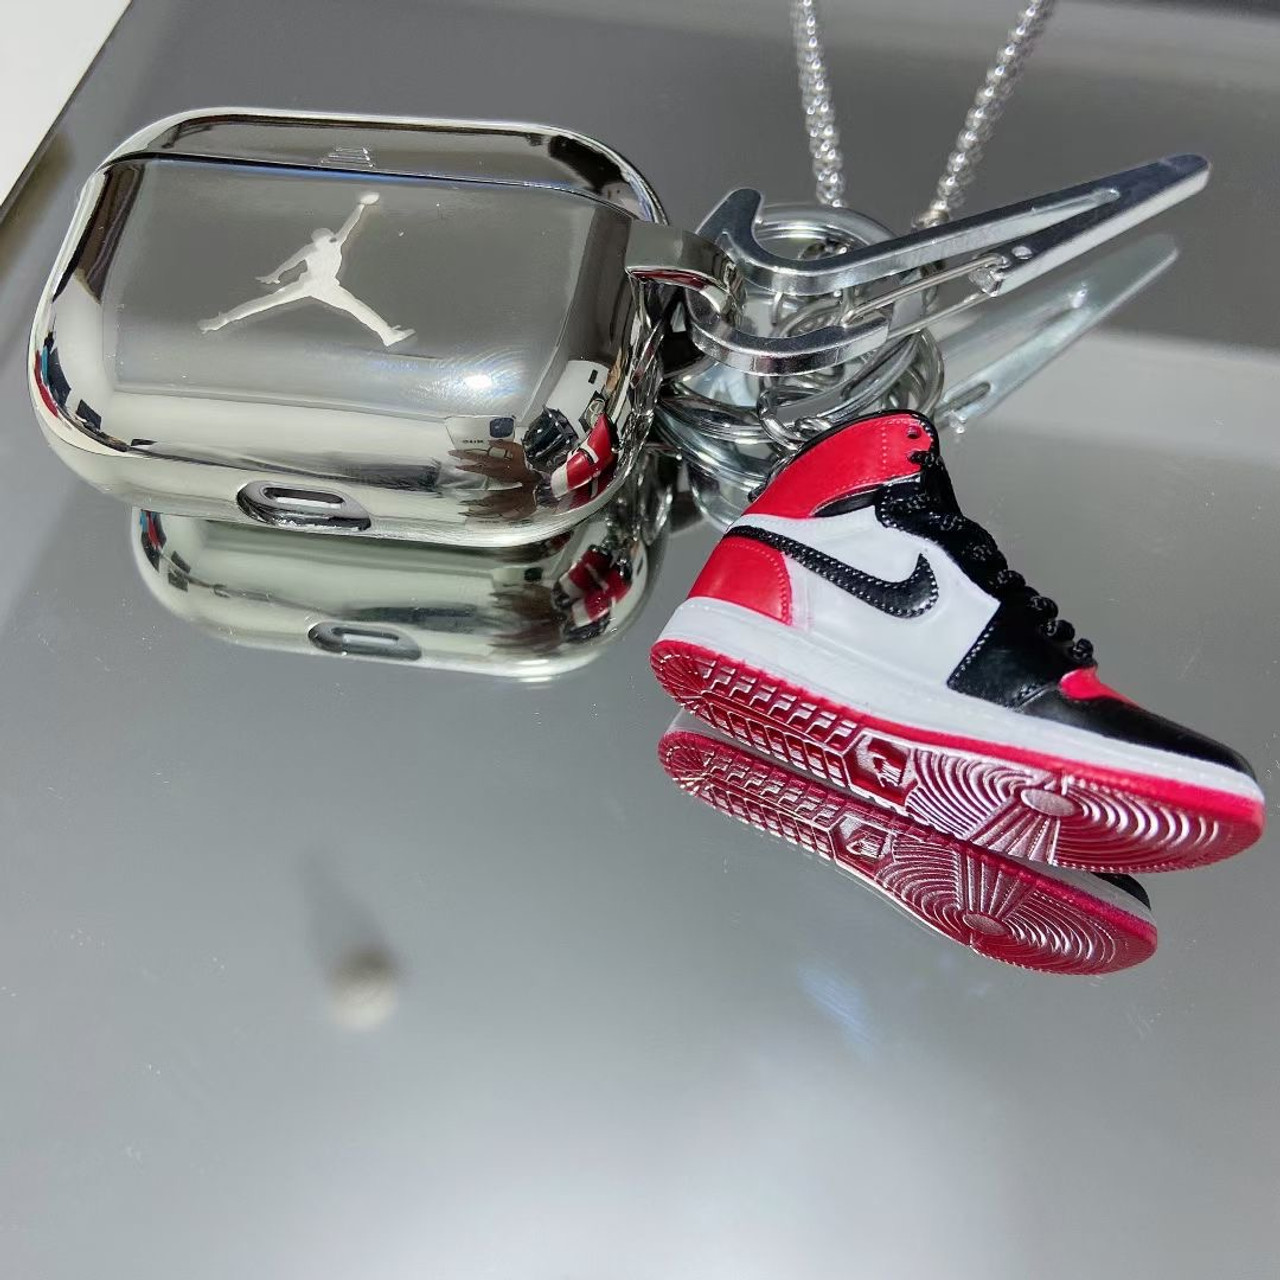 Nike Air Jordan Sneakers Protection Cover Case For Apple Airpods